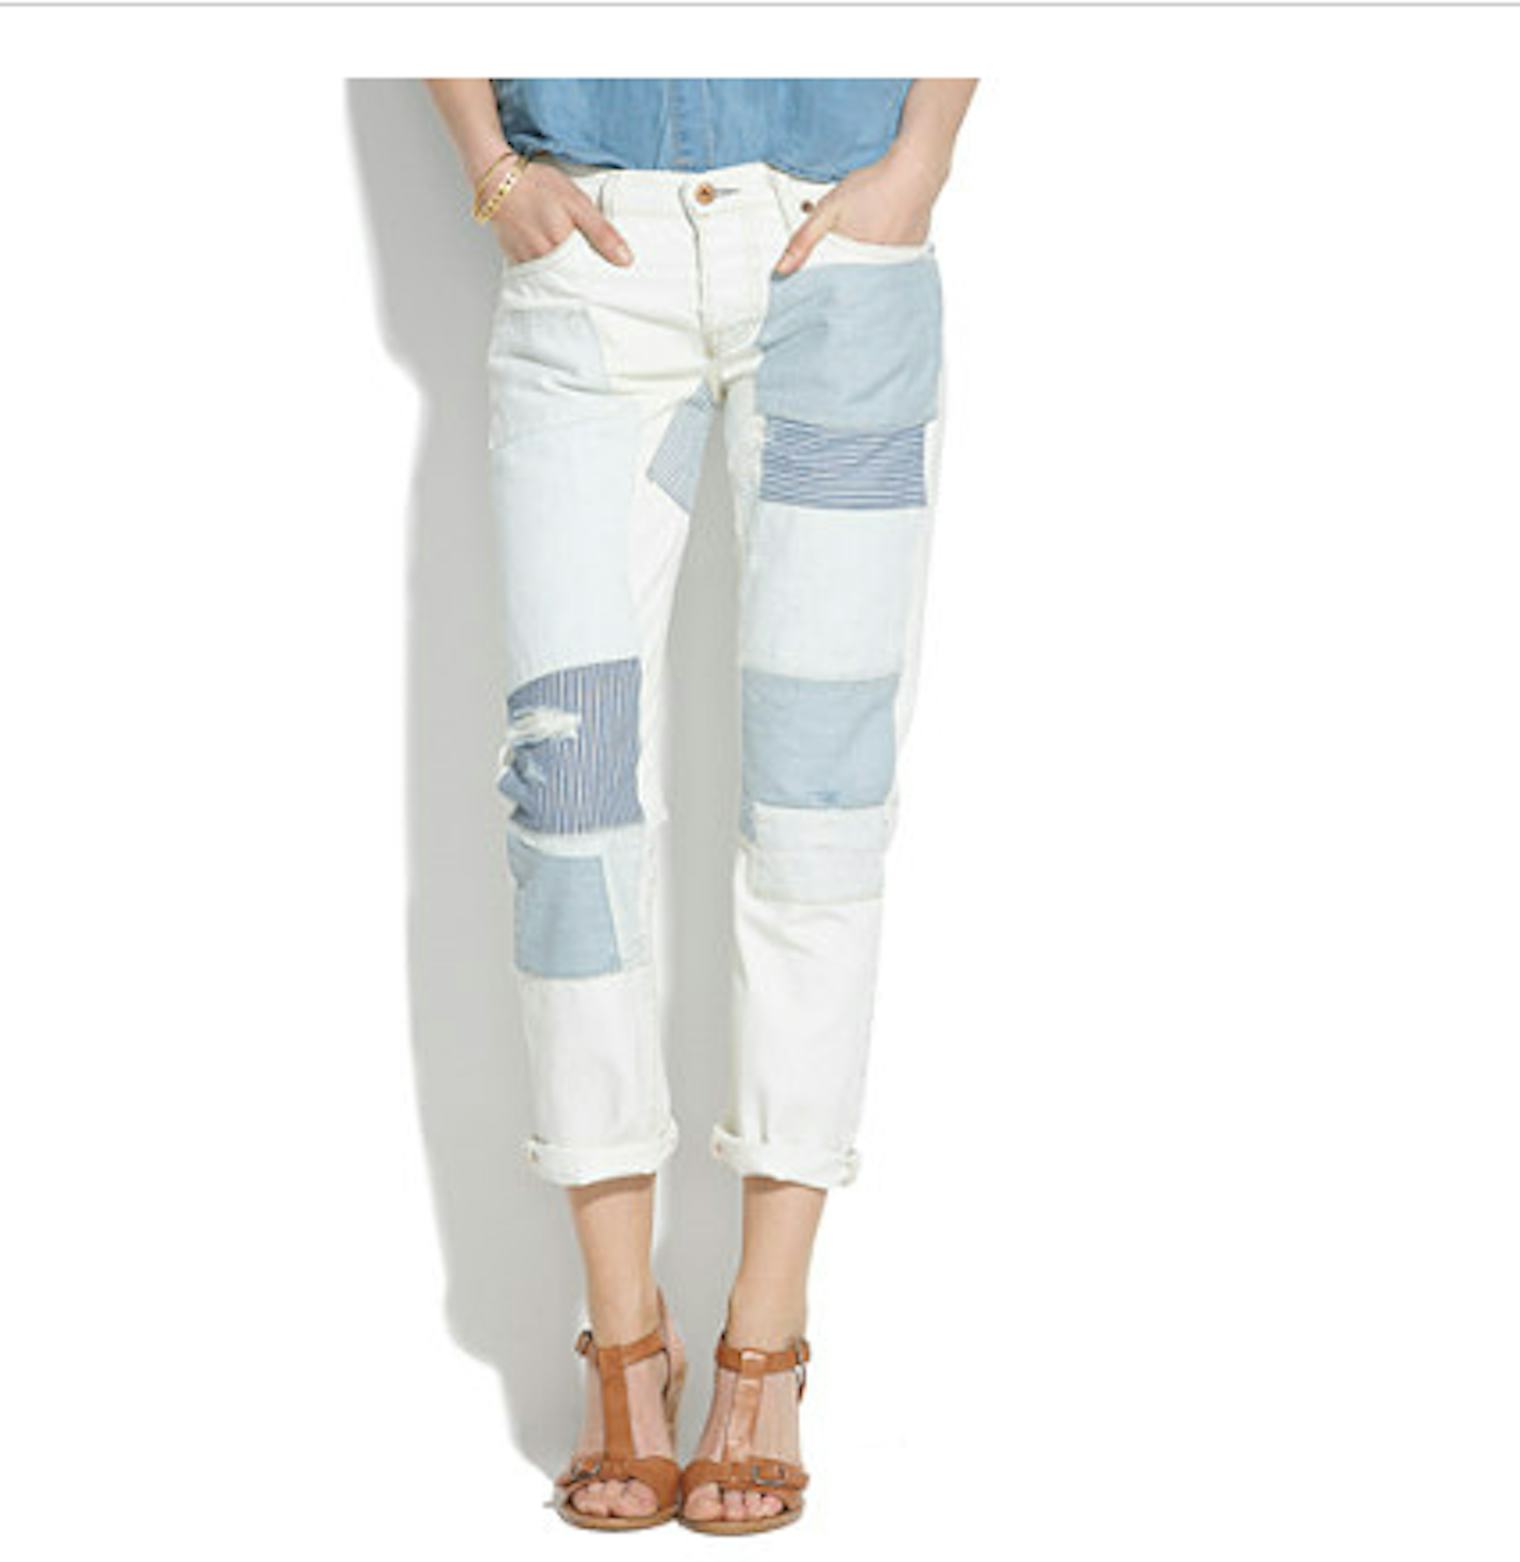 7 Patchwork Jeans To Shop Now, Because The Chic Farmer Look Is Super ...